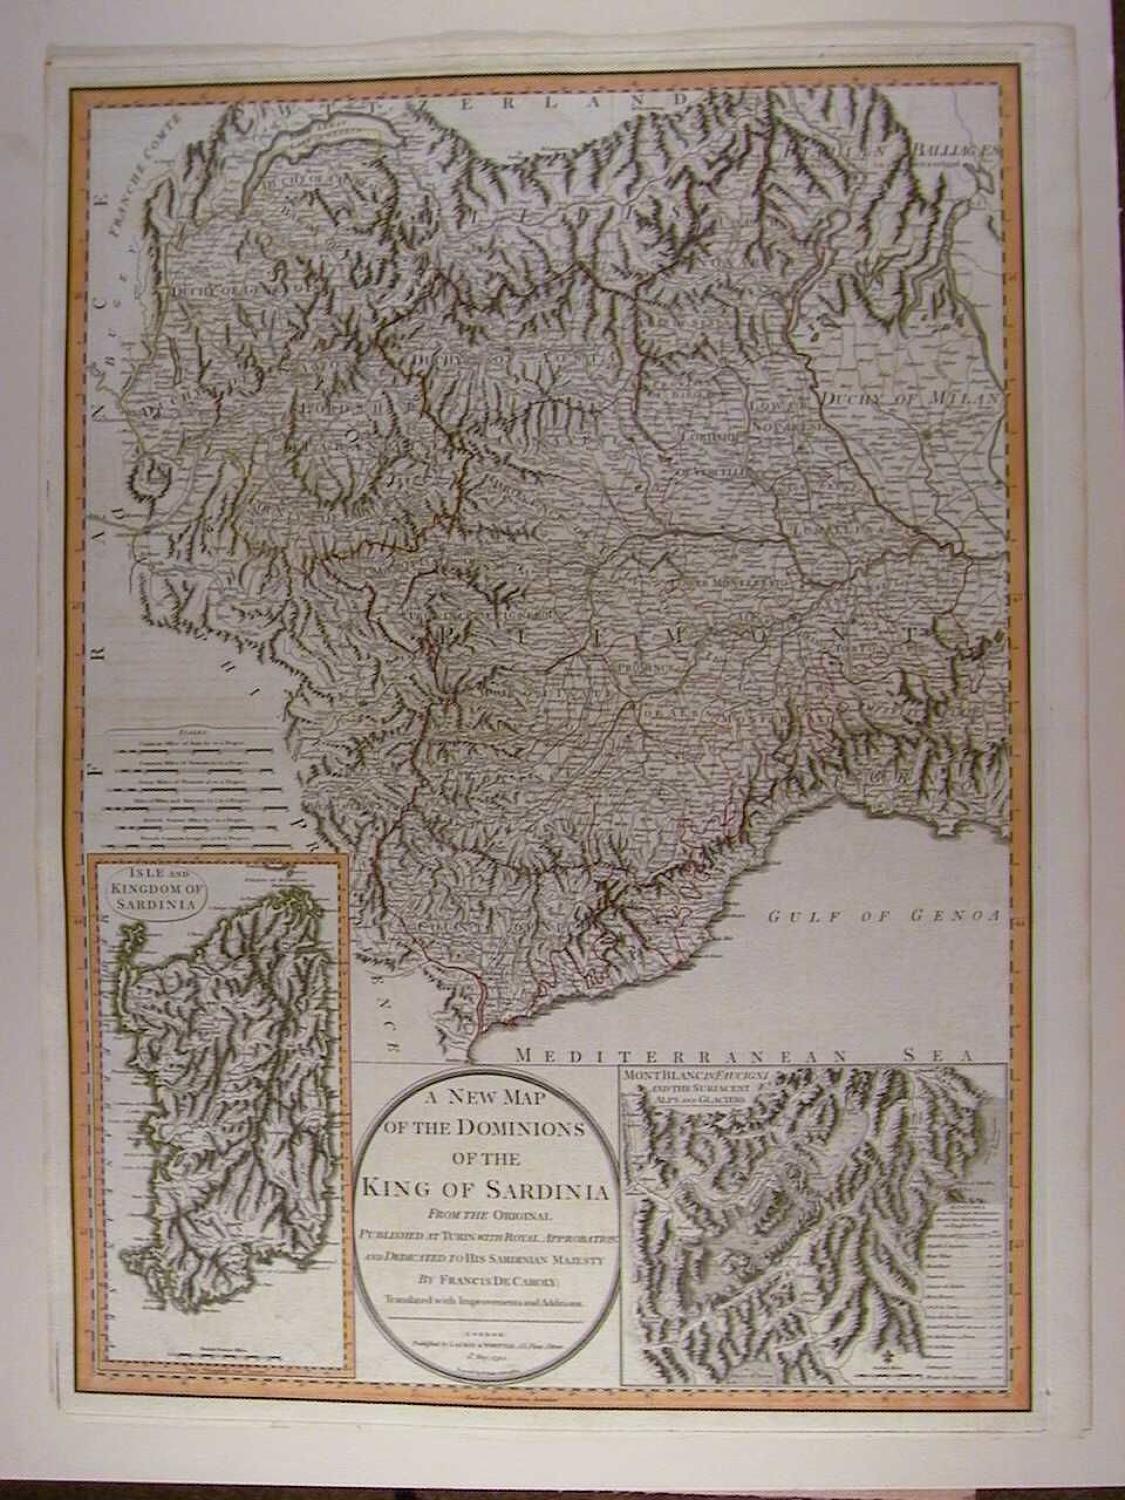 A New Map of the Dominions of the King of Sardinia by Robert Mylne